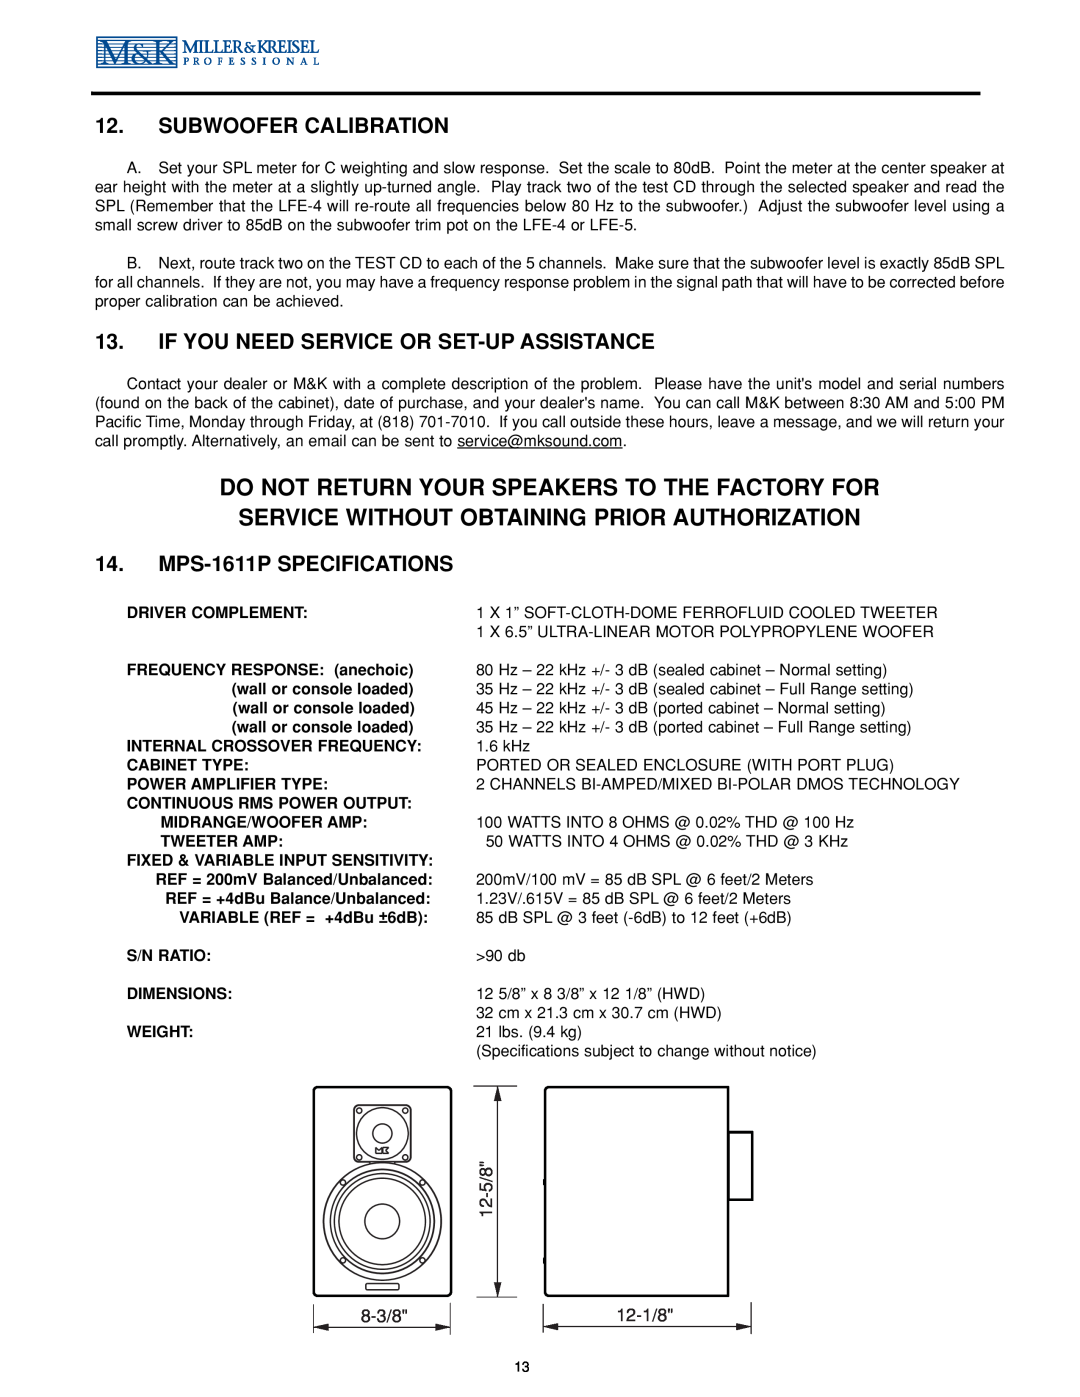 MK Sound Subwoofer Calibration, If You Need Service Or Set-Upassistance, MPS-1611PSPECIFICATIONS, 12-5/8 8-3/8, 12-1/8 